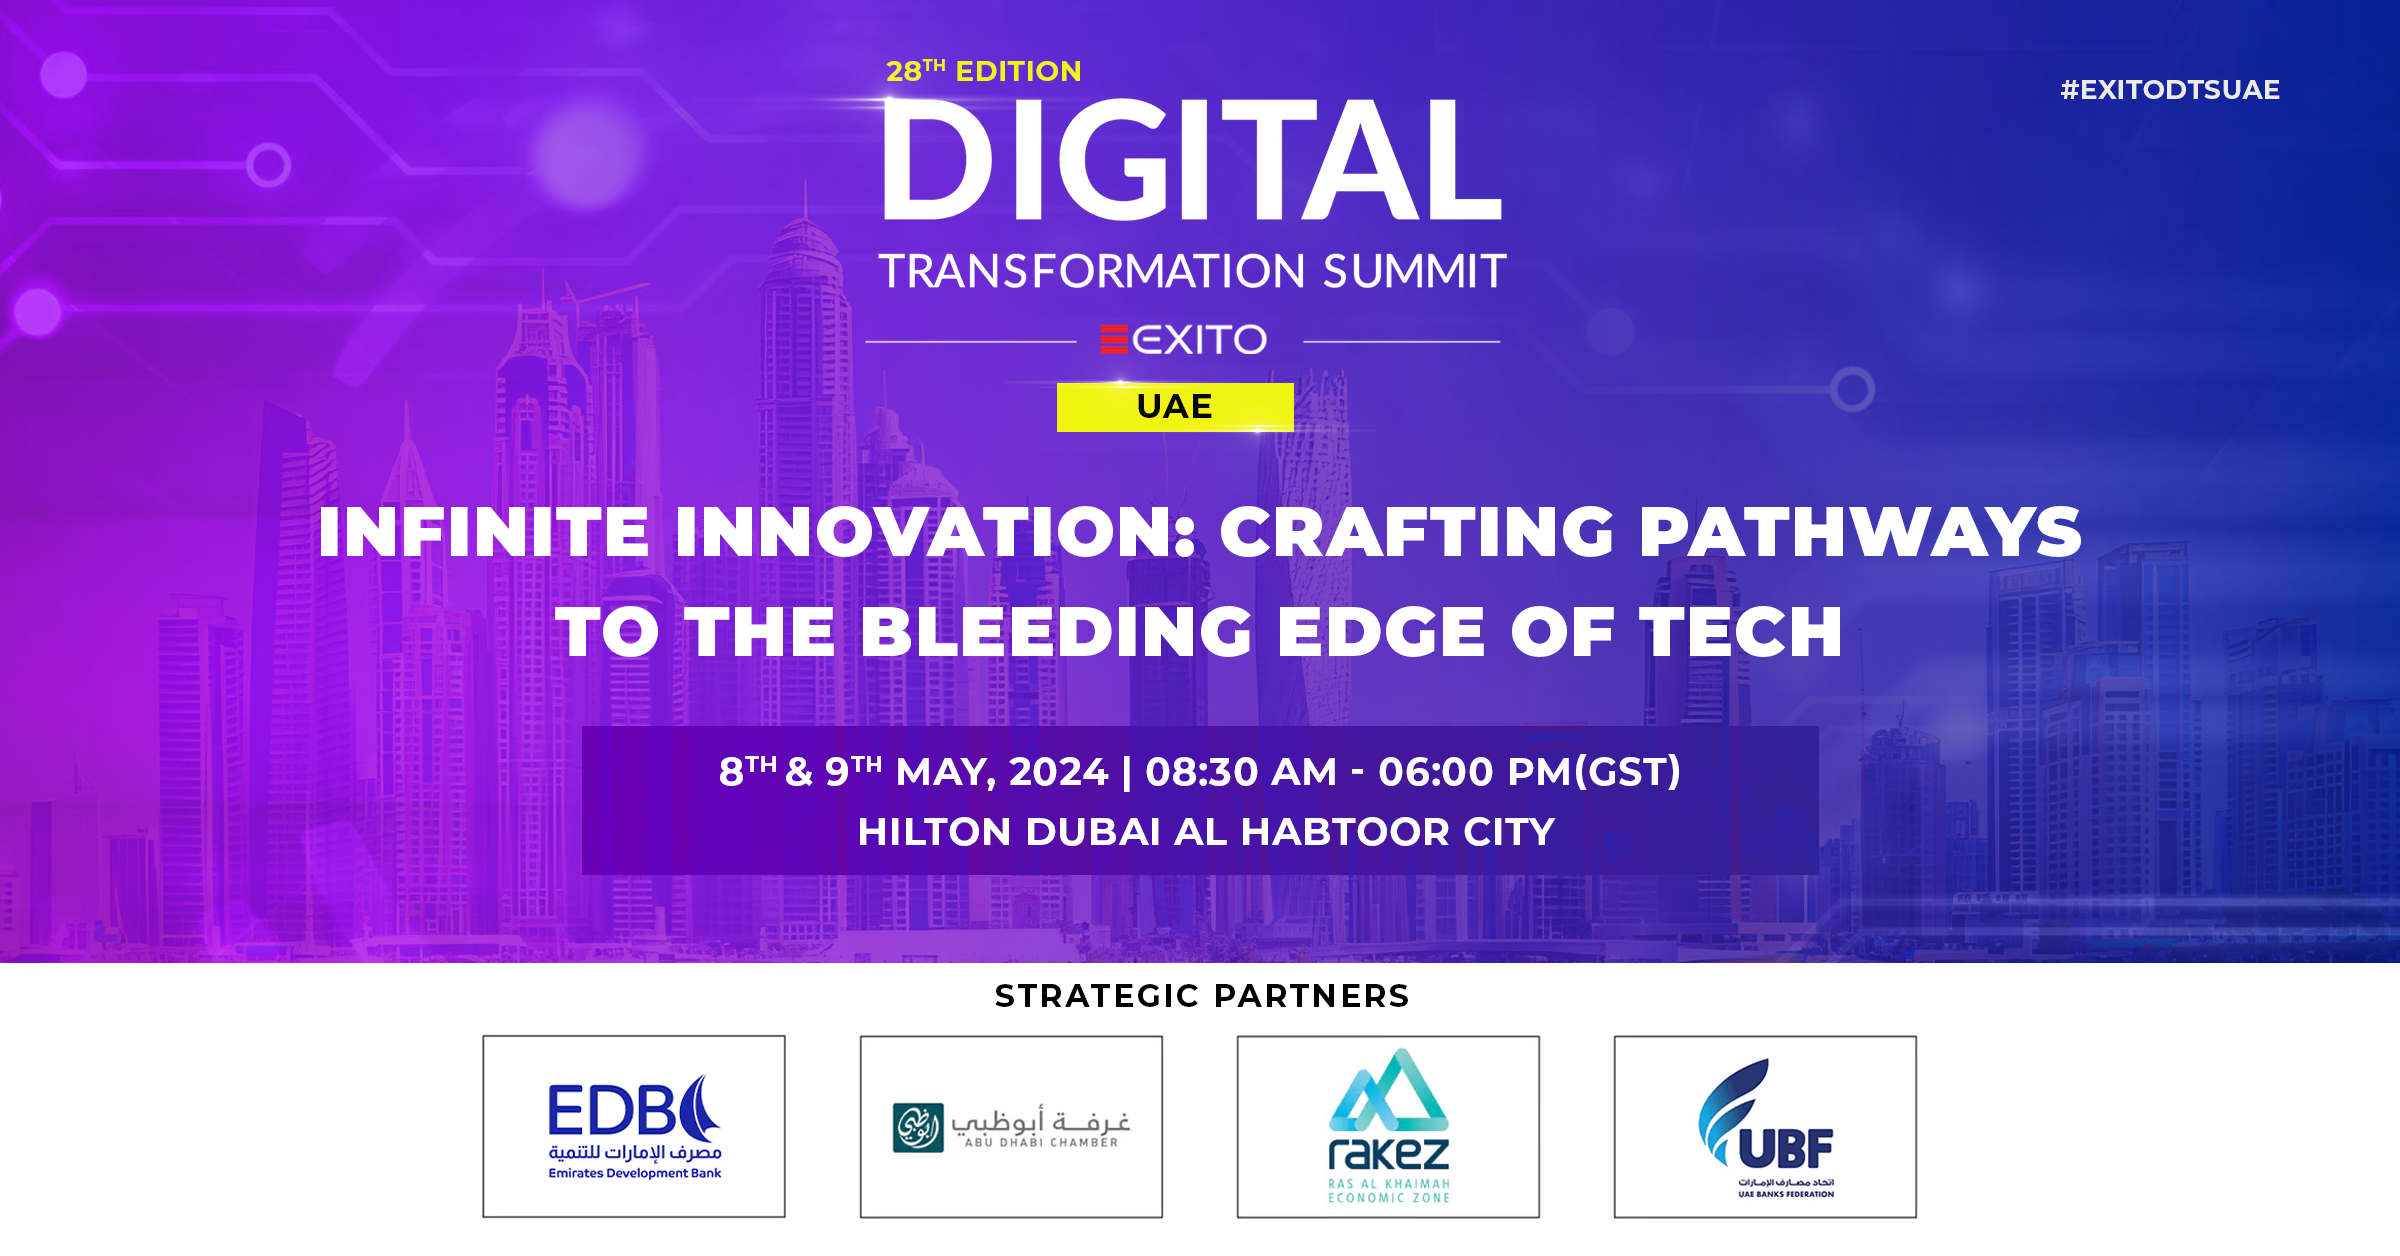 Digital Transformation Summit, in its 28th edition, is part of a global event series that takes place in over ten cities on several continents